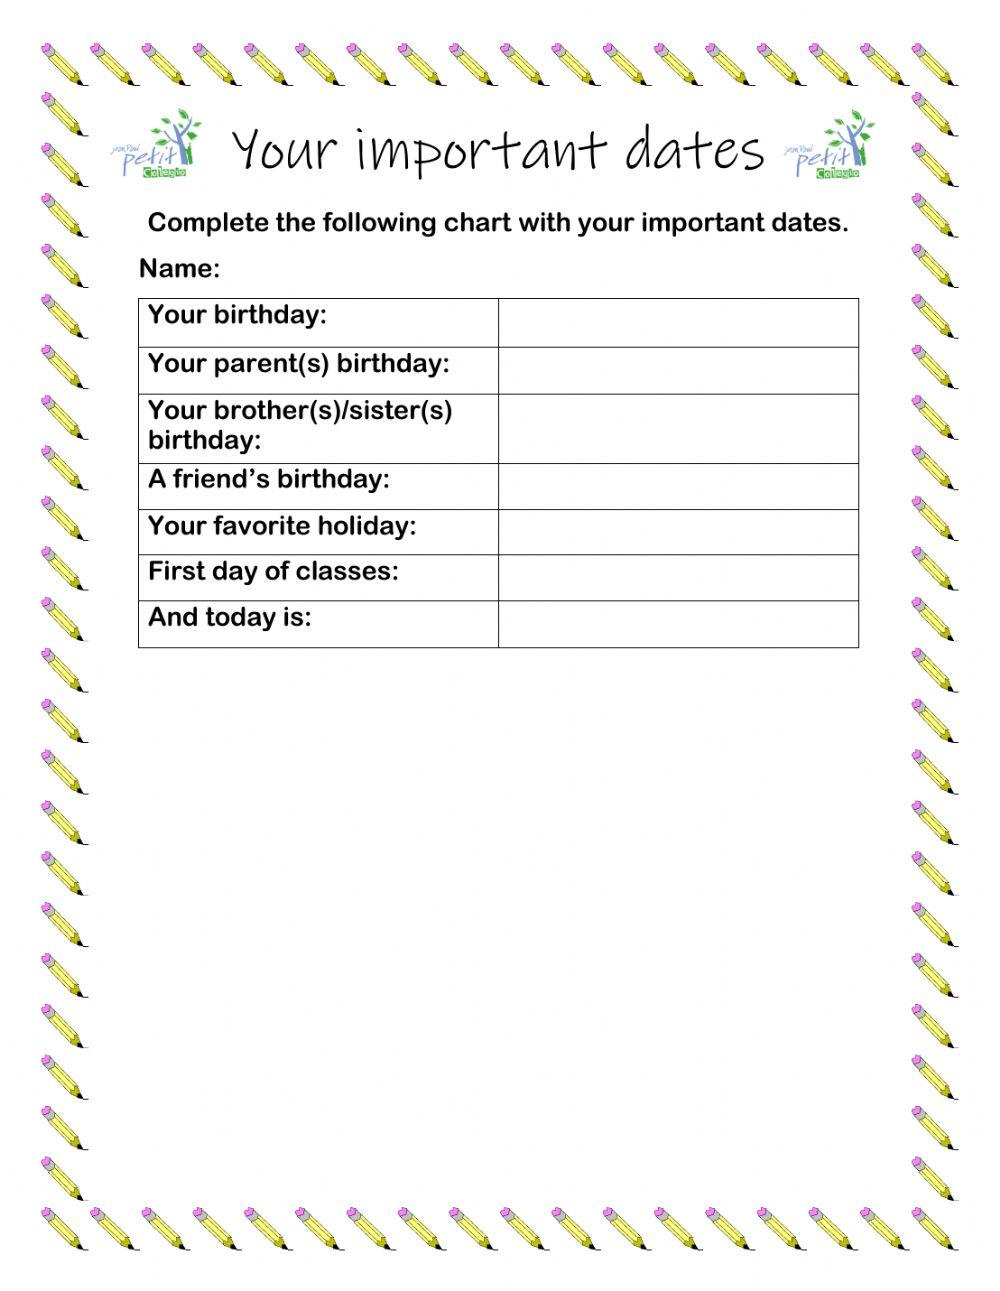 Your important dates